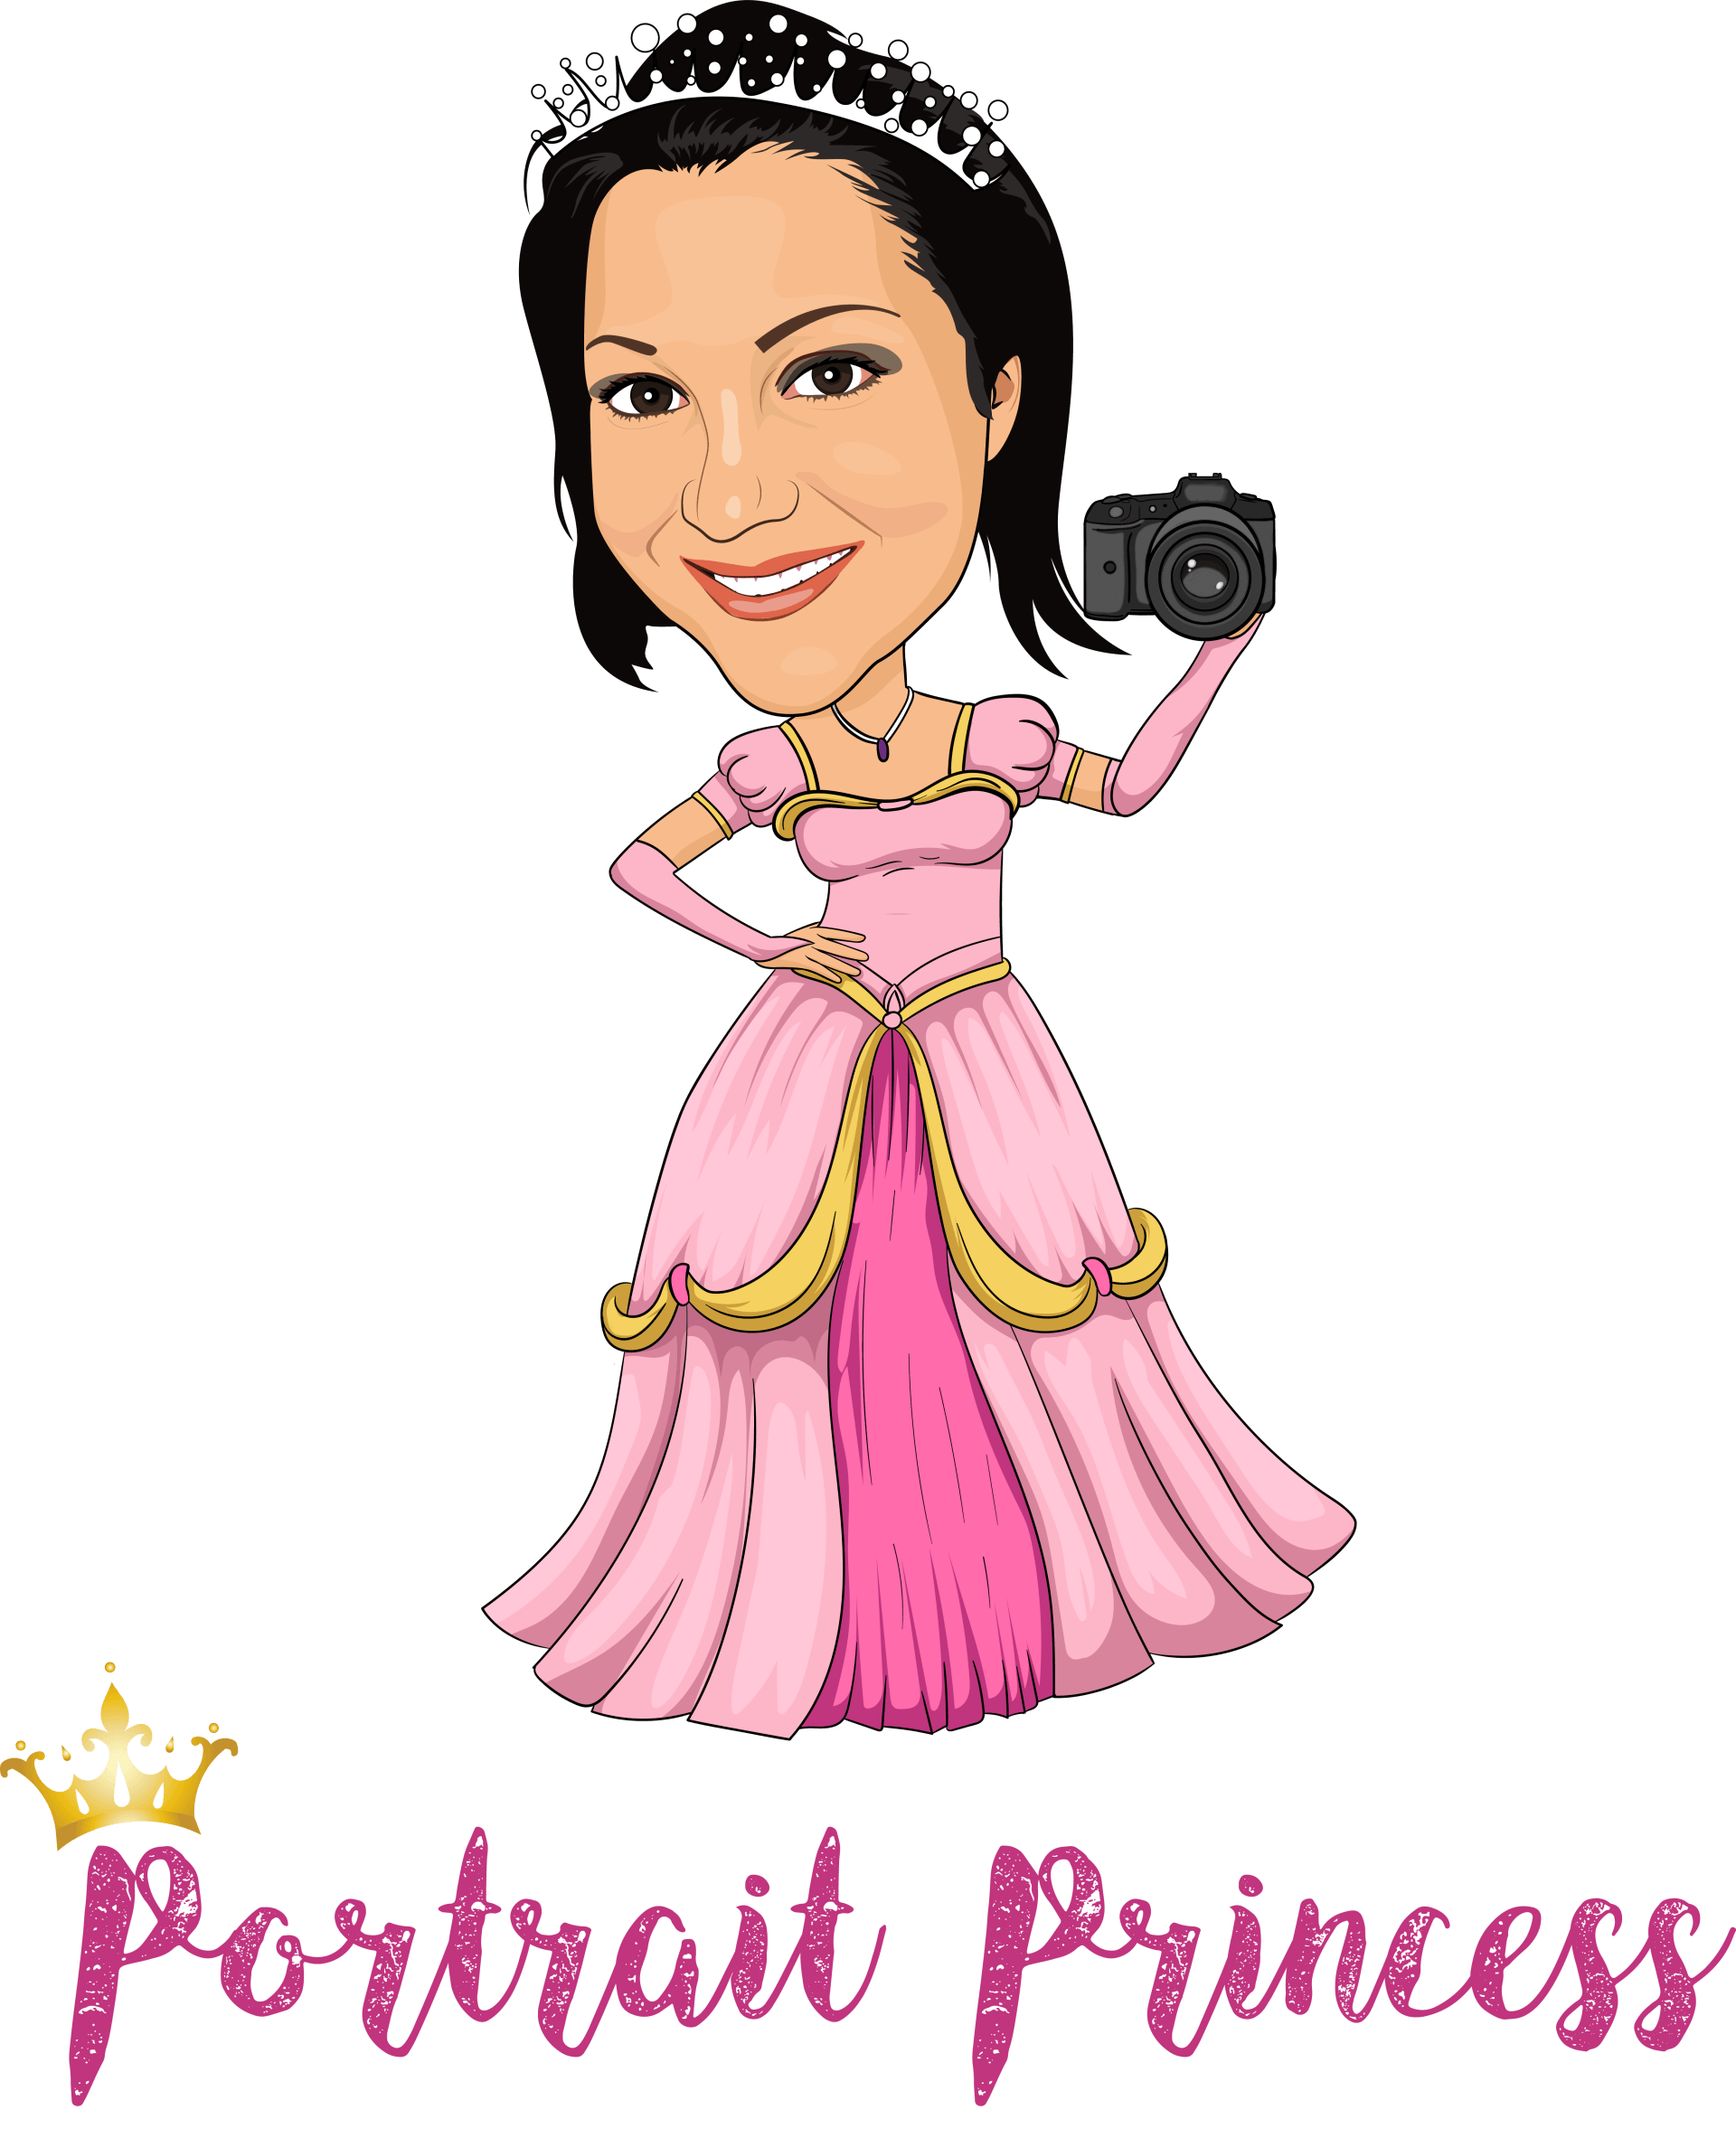 Portrait Princess Logo With Caricature of Yvonne